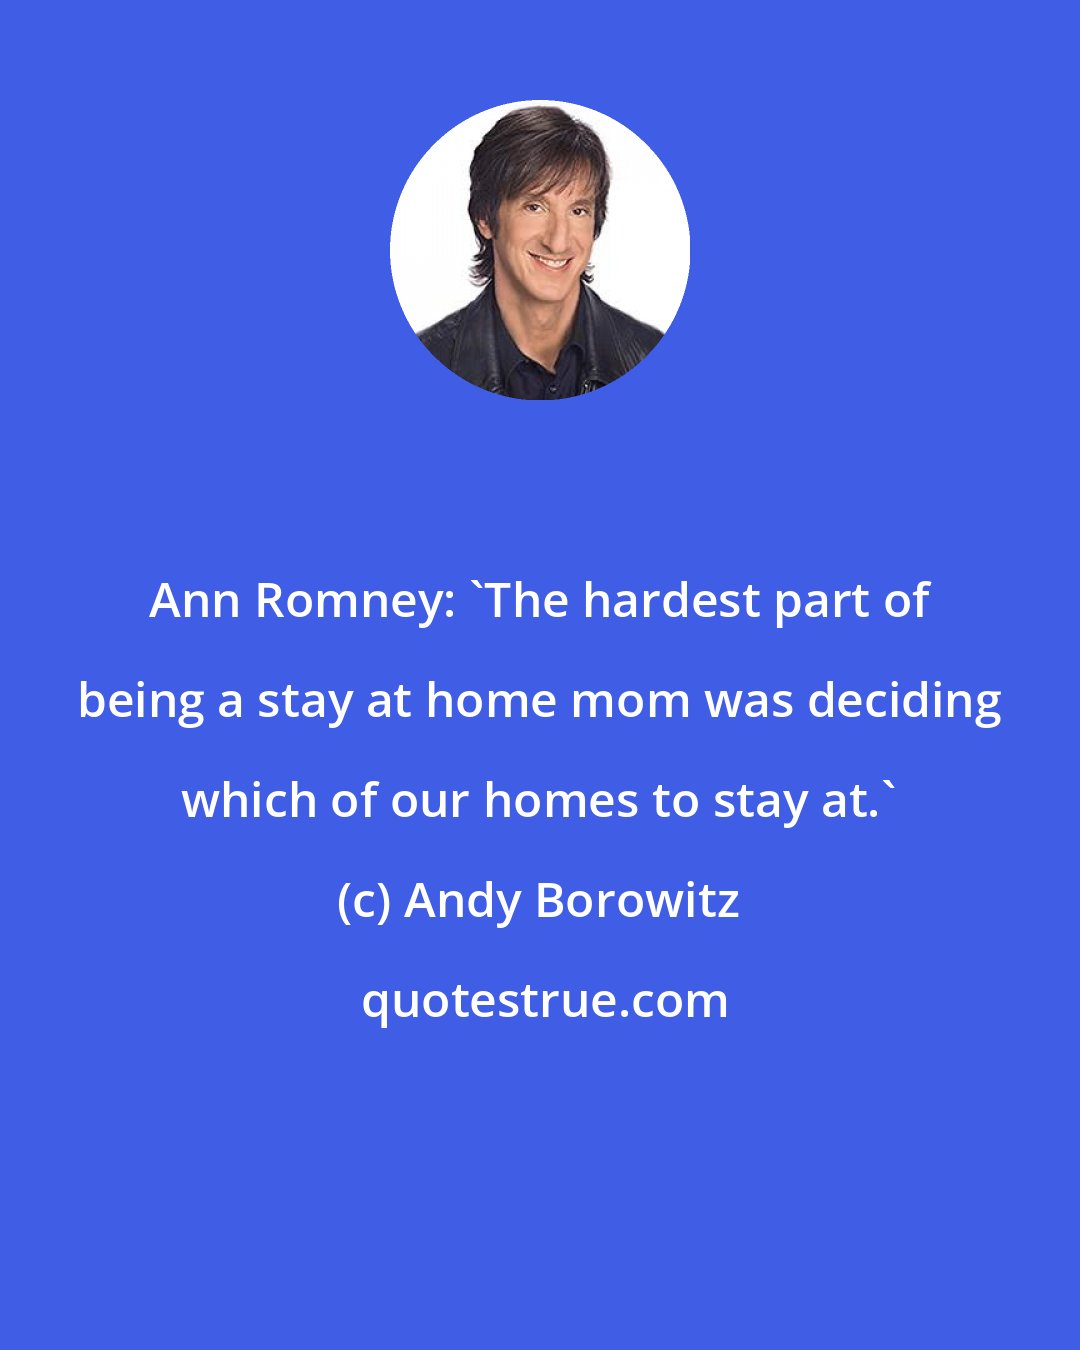 Andy Borowitz: Ann Romney: 'The hardest part of being a stay at home mom was deciding which of our homes to stay at.'